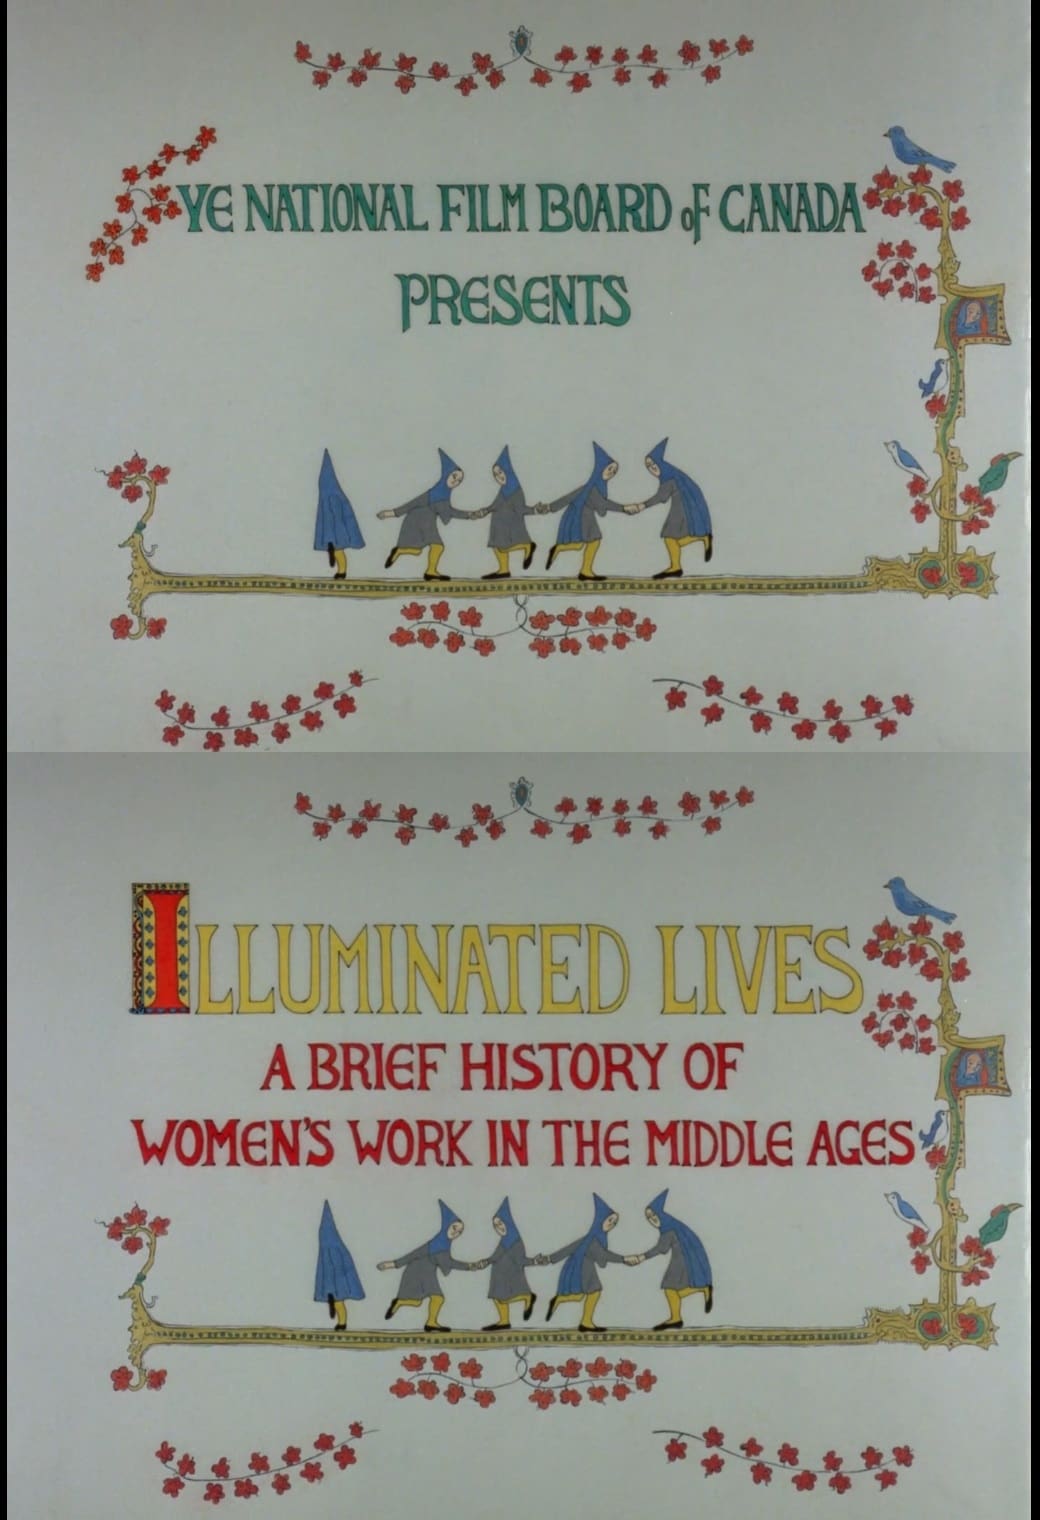 Illuminated Lives: A Brief History of Women's Work in the Middle Ages